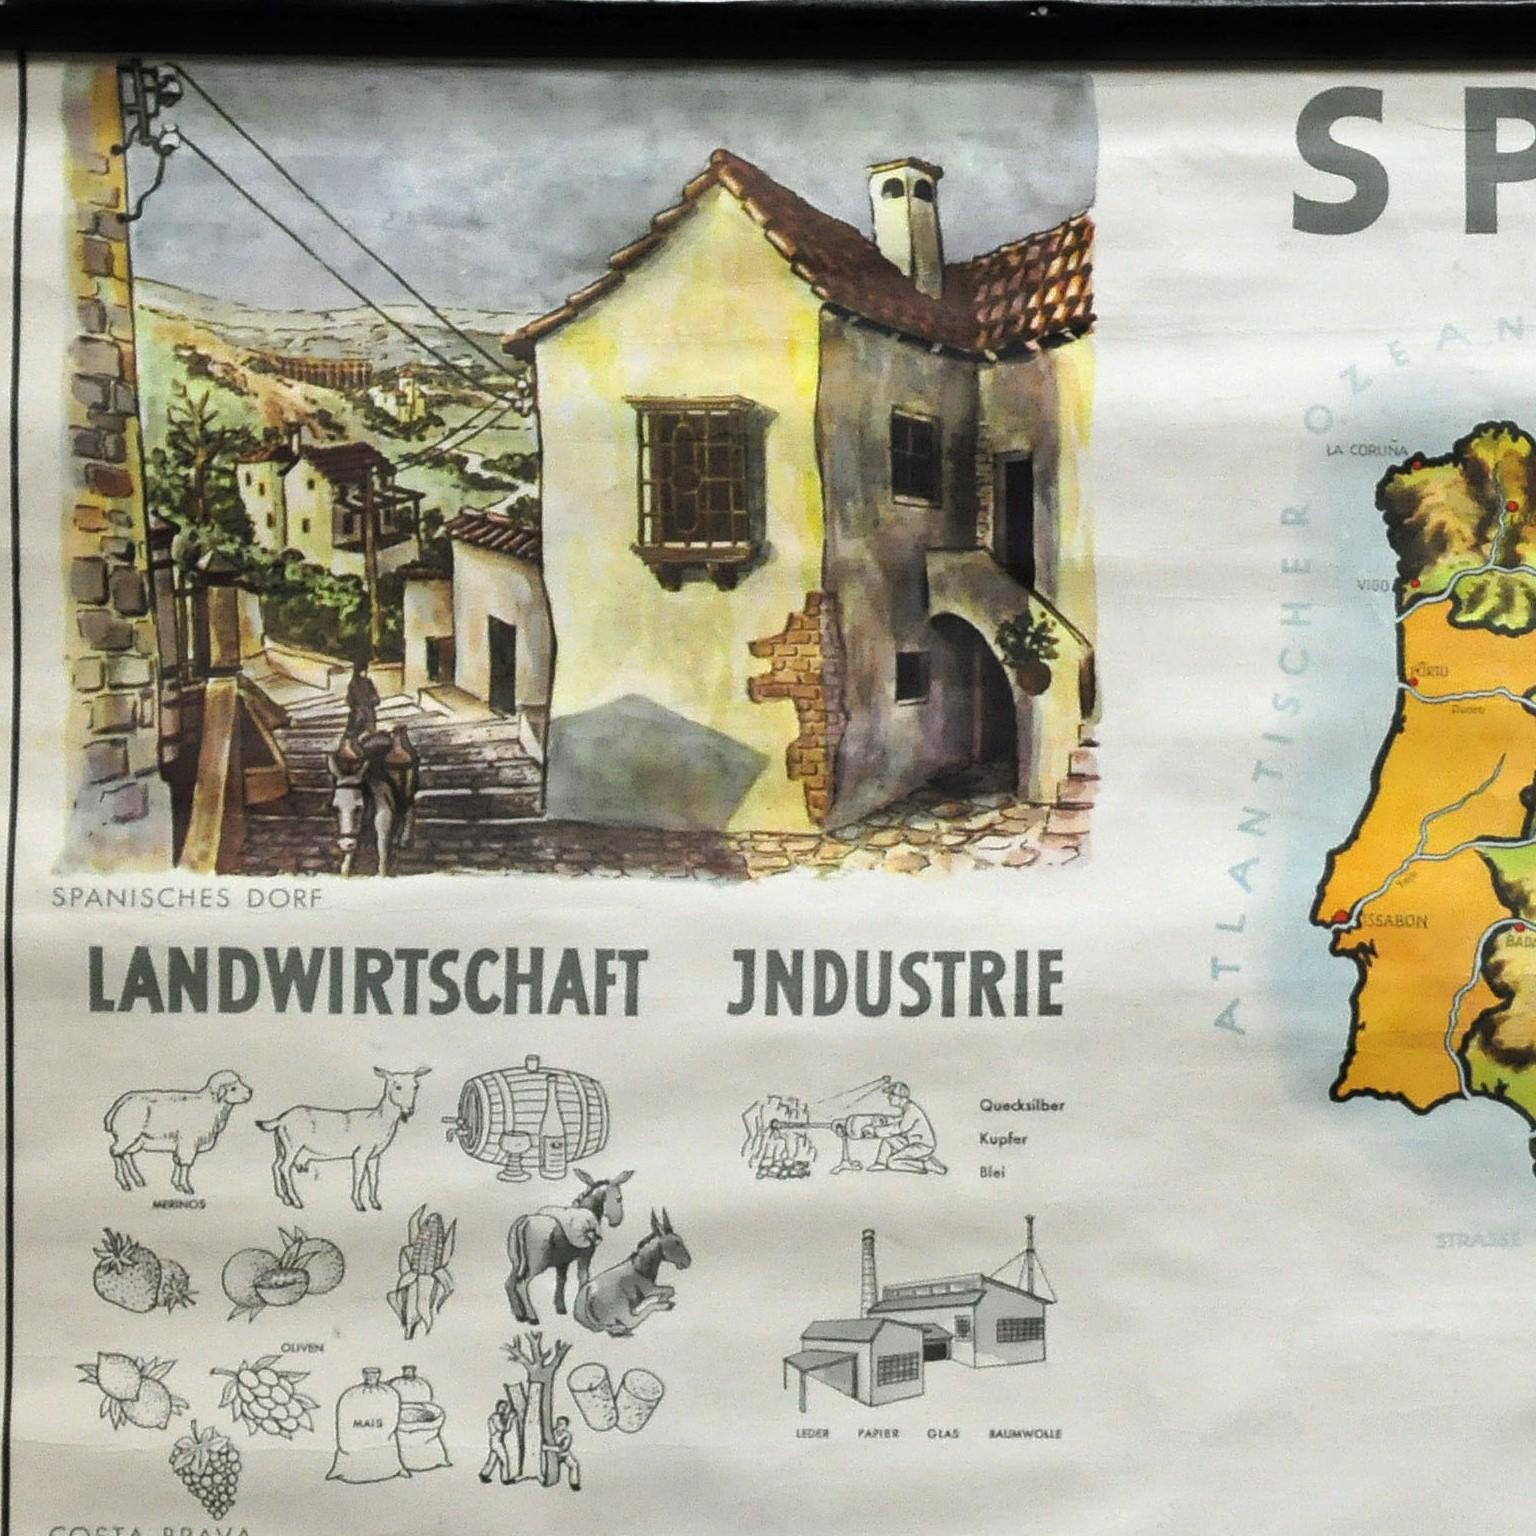 A countrycore vintage pull-down wall chart depicting Spain with a map and coloful pictures of citylife and countryside. Used as teaching material in German schools. colorful print on paper reinforced with canvas. published by P. Stockmann, Bochum.